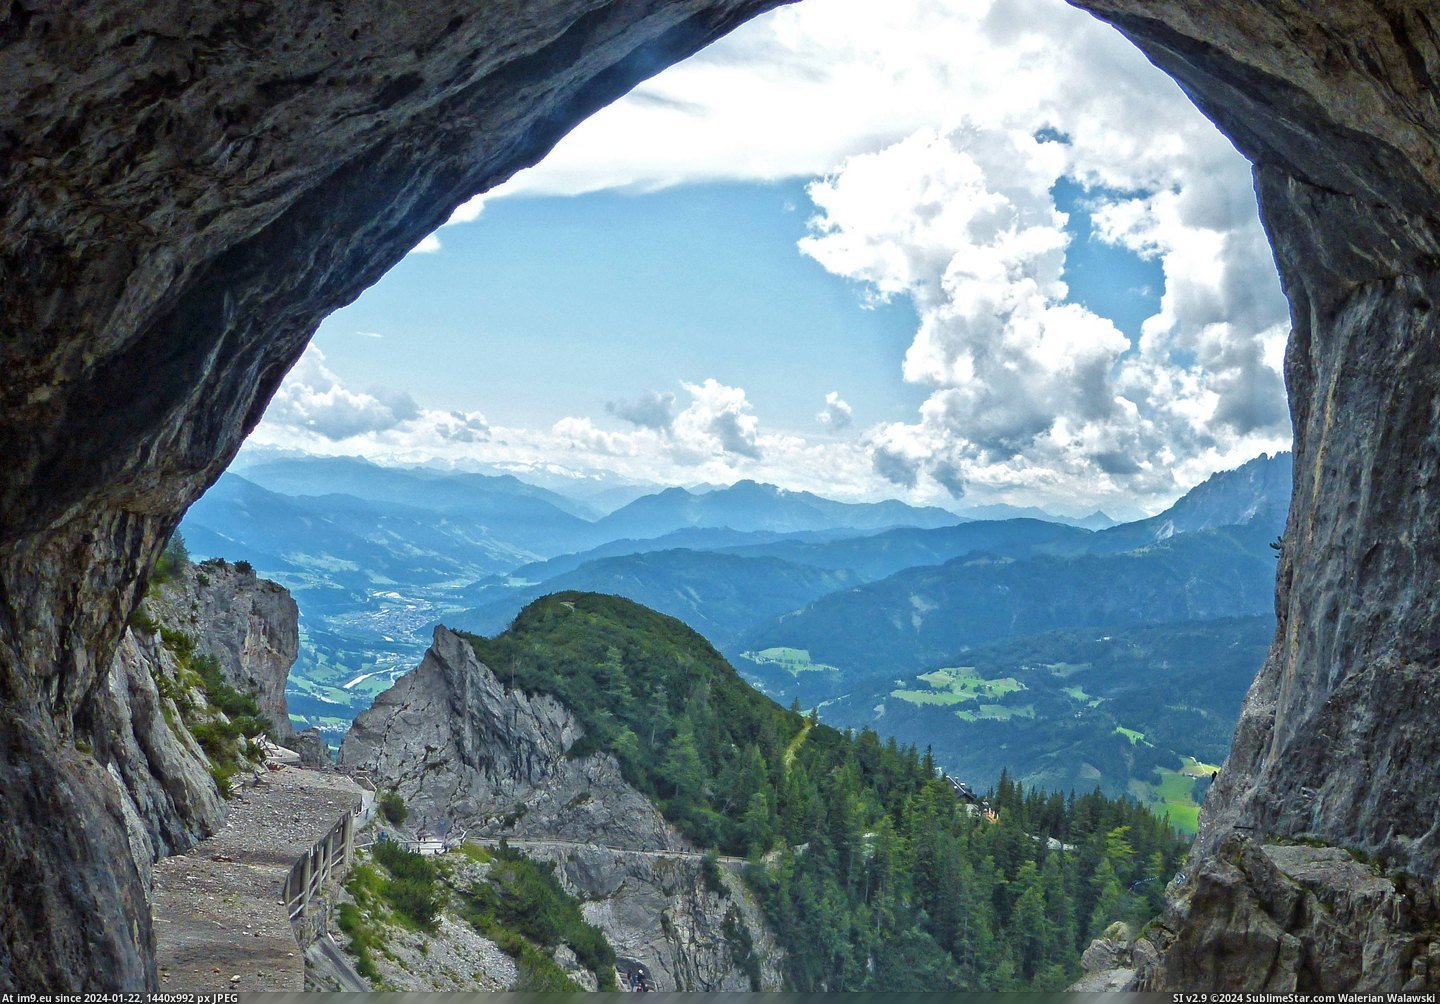 #World #Ice #Austria #Entrance #Werfen #Largest #Cave [Earthporn] View from the entrance of the largest ice cave in the world - Werfen, Austria [OC][3496x2421] Pic. (Bild von album My r/EARTHPORN favs))